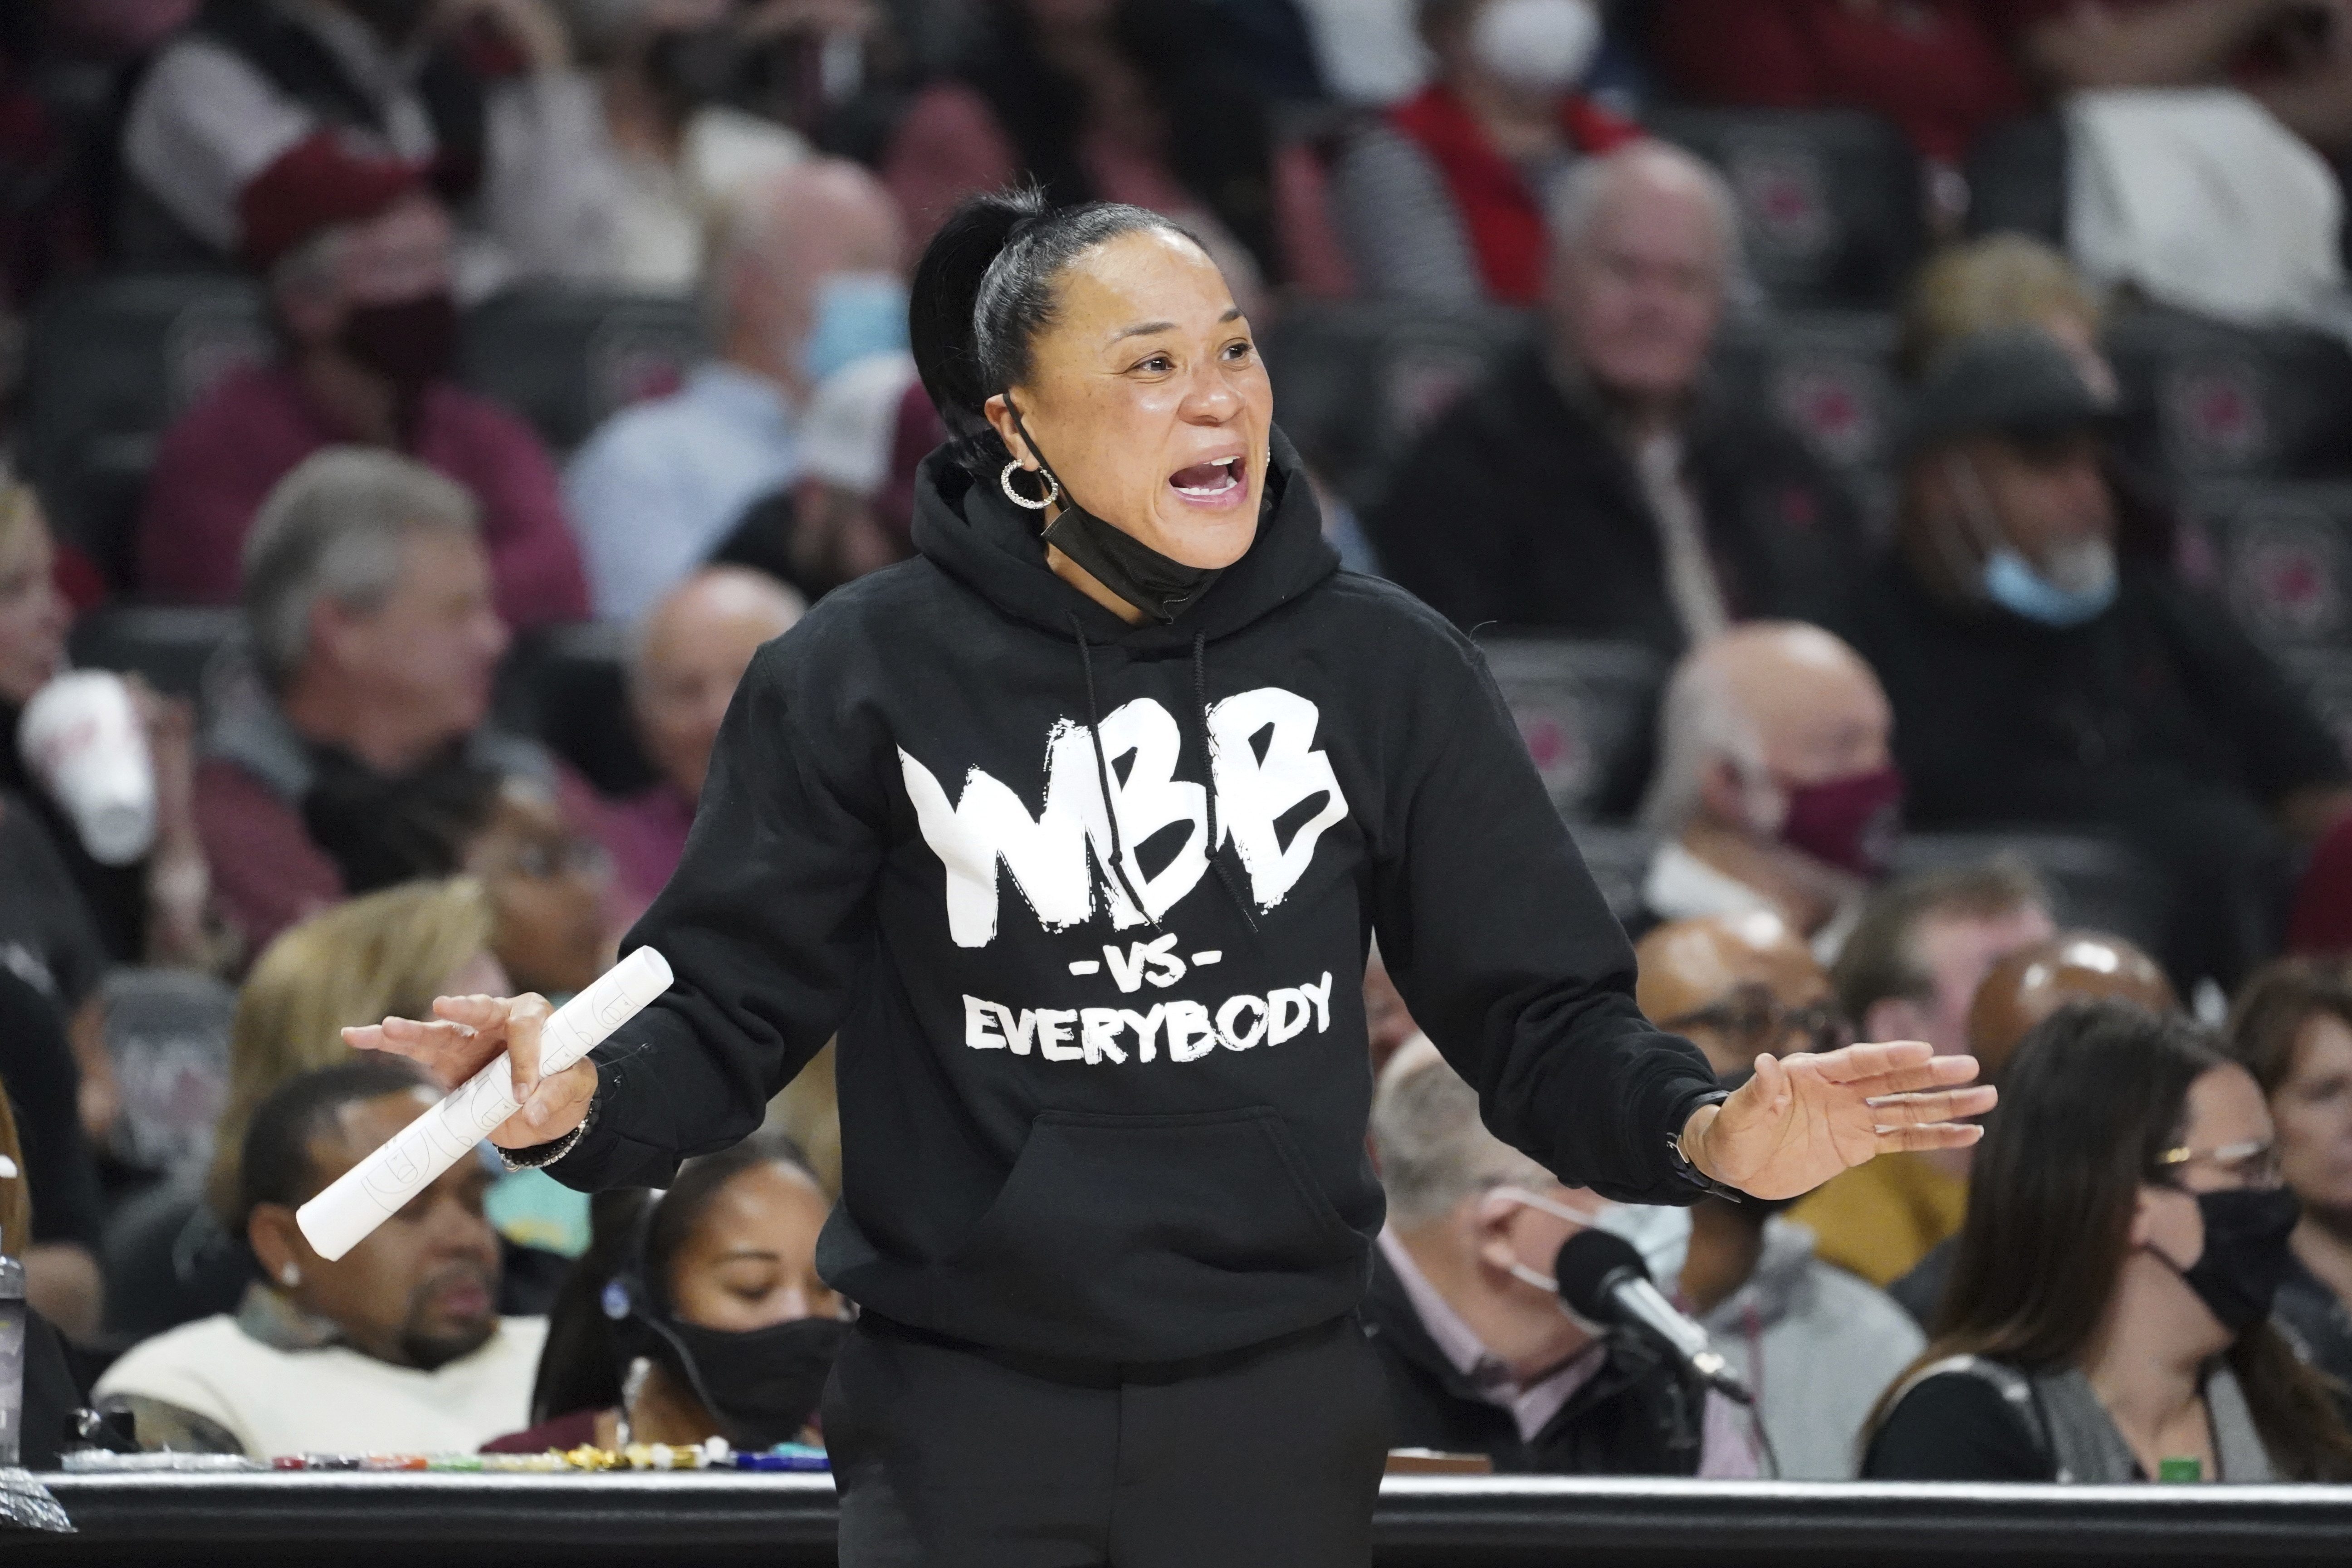 March Madness: South Carolina coach Dawn Staley defends her players again